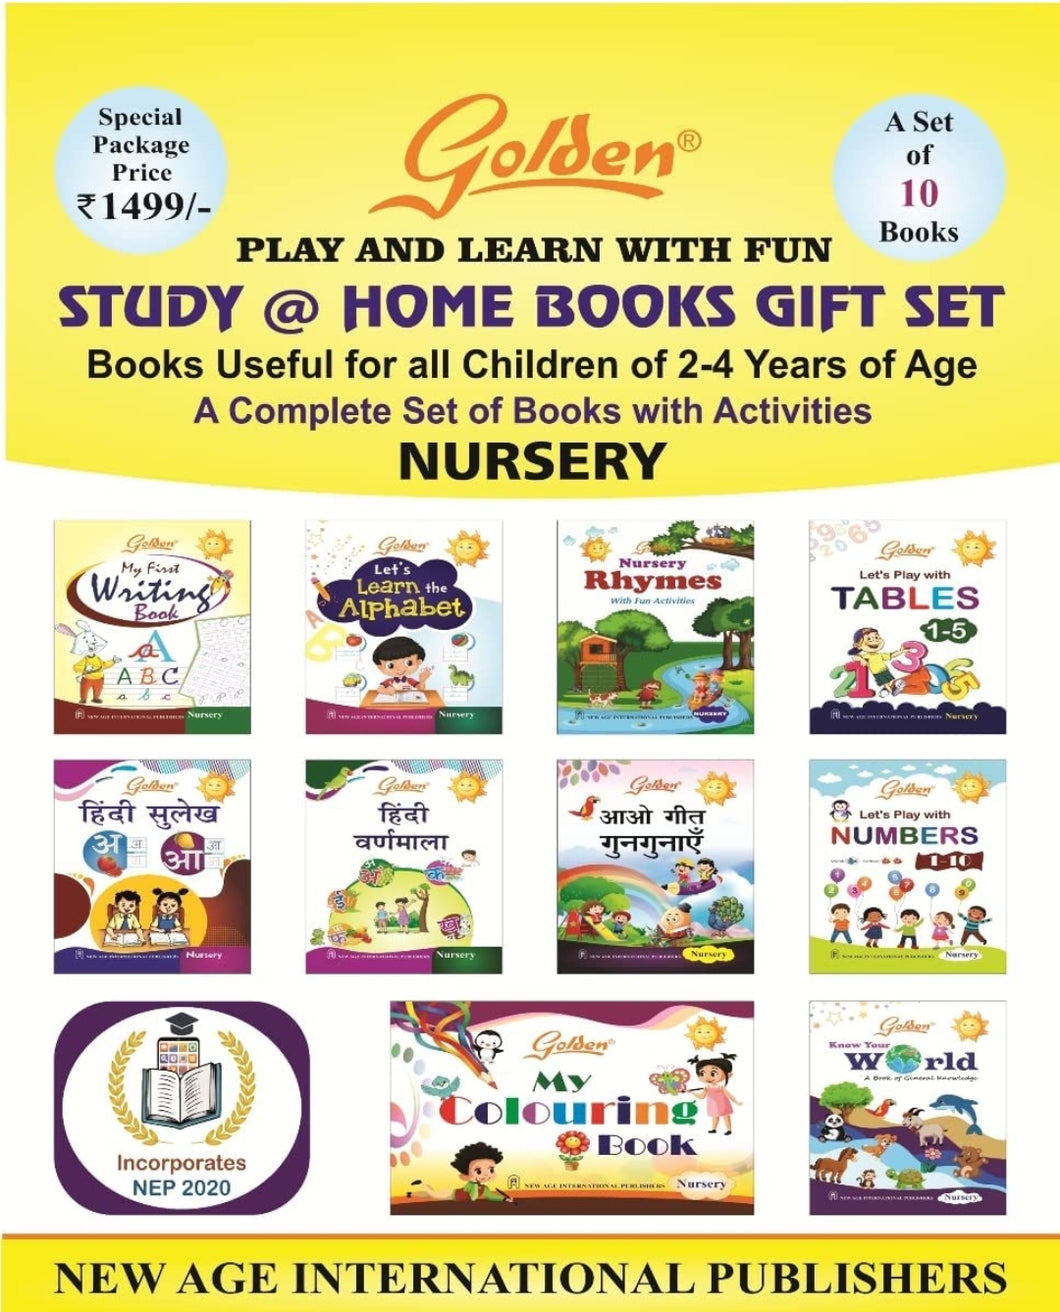 Golden all in one 10 books set for Nursery (CBSE/ICSE)